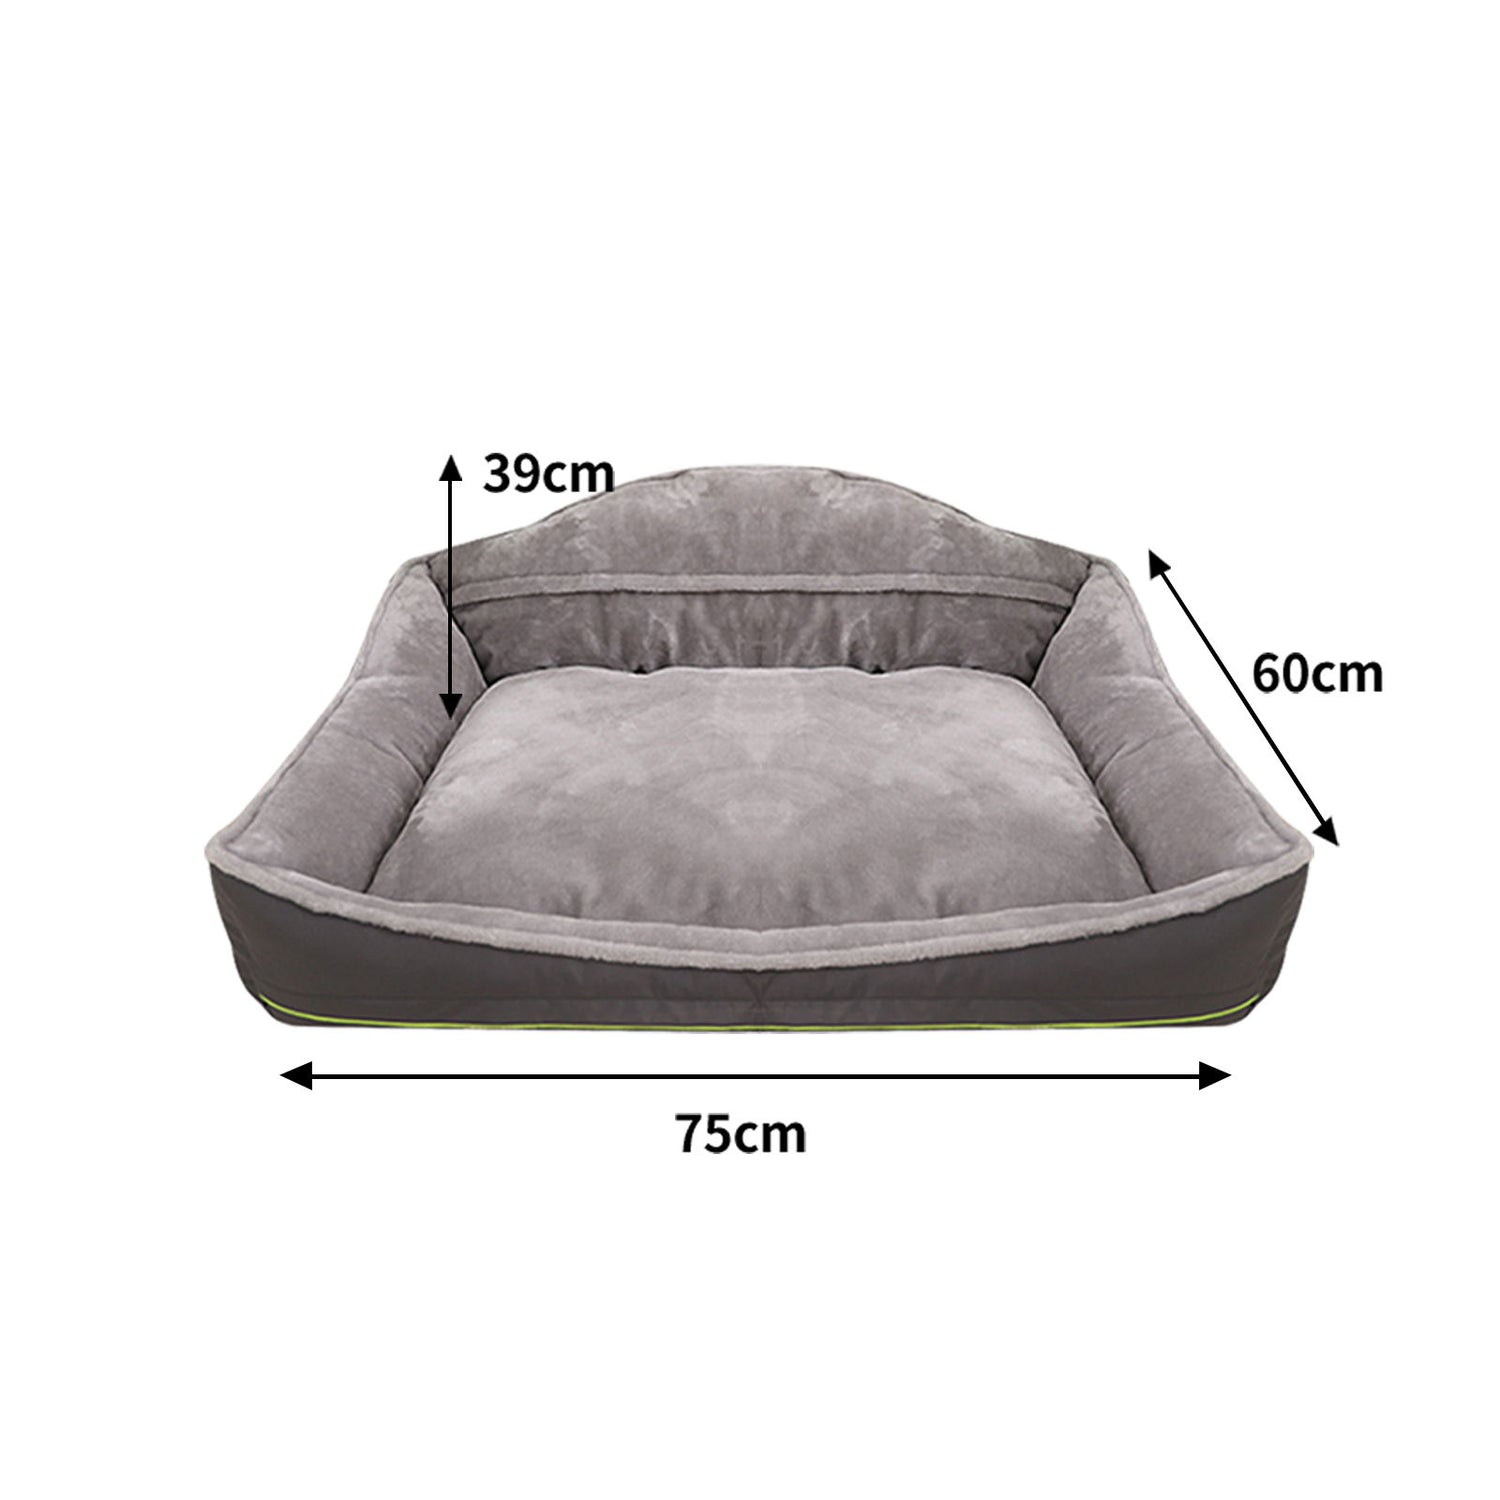 Sofa-Style Dog Bed Waterproof Washable Soft High Back Comfy Sleeping Kennel M-Pet Beds-PEROZ Accessories